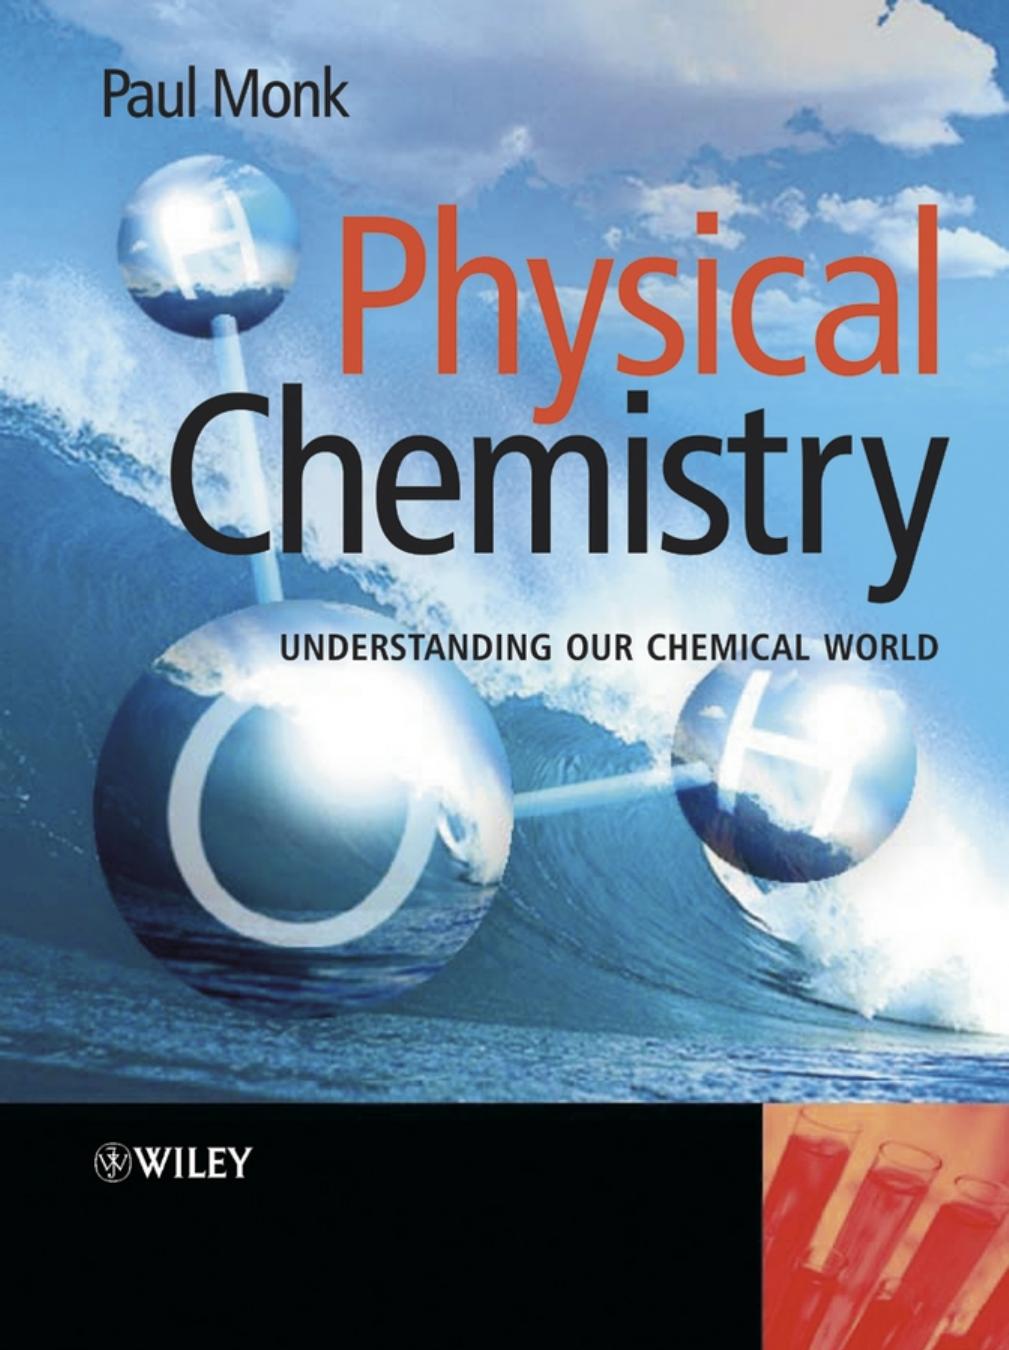 physical Chemistry-Understanding Our Chemical World.pdf 2007